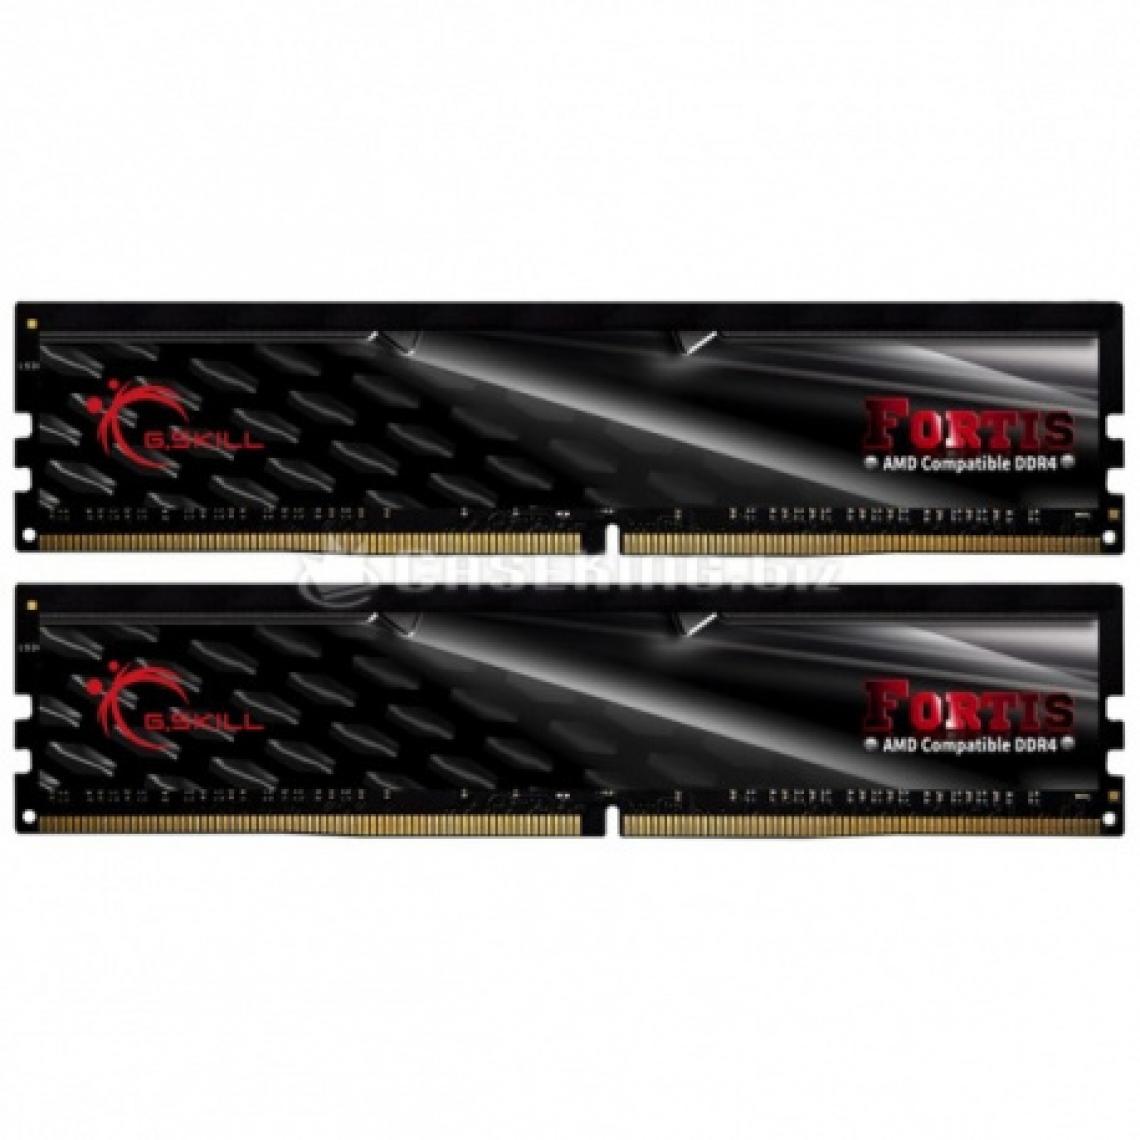 Gskill - Fortis Series 16 Go (2x 8 Go) DDR4 2400 MHz CL16 - RAM PC Fixe